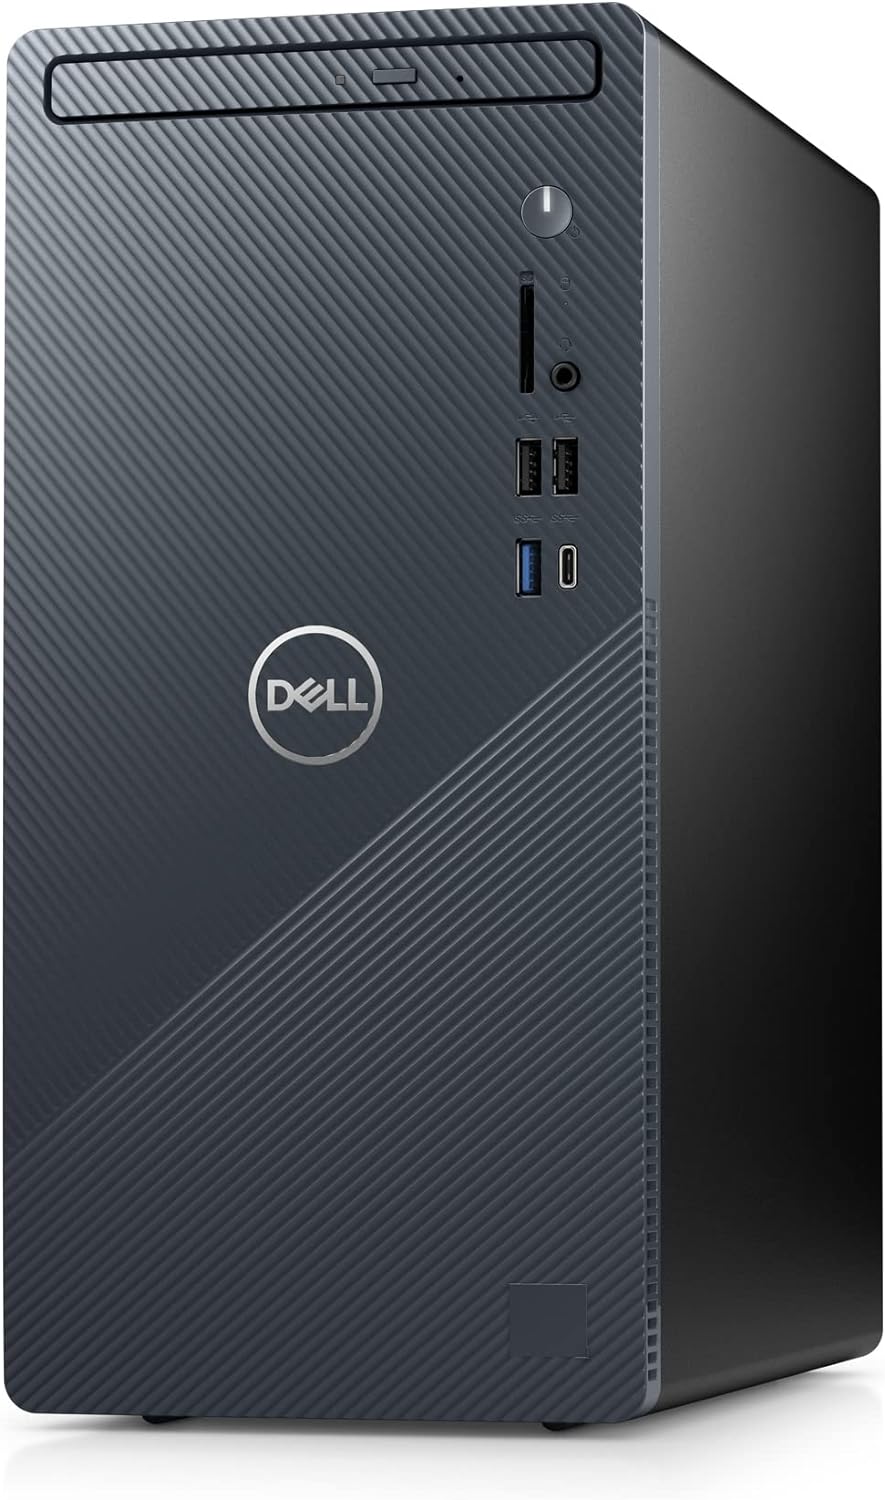 Dell Inspiron desktop with LED codes